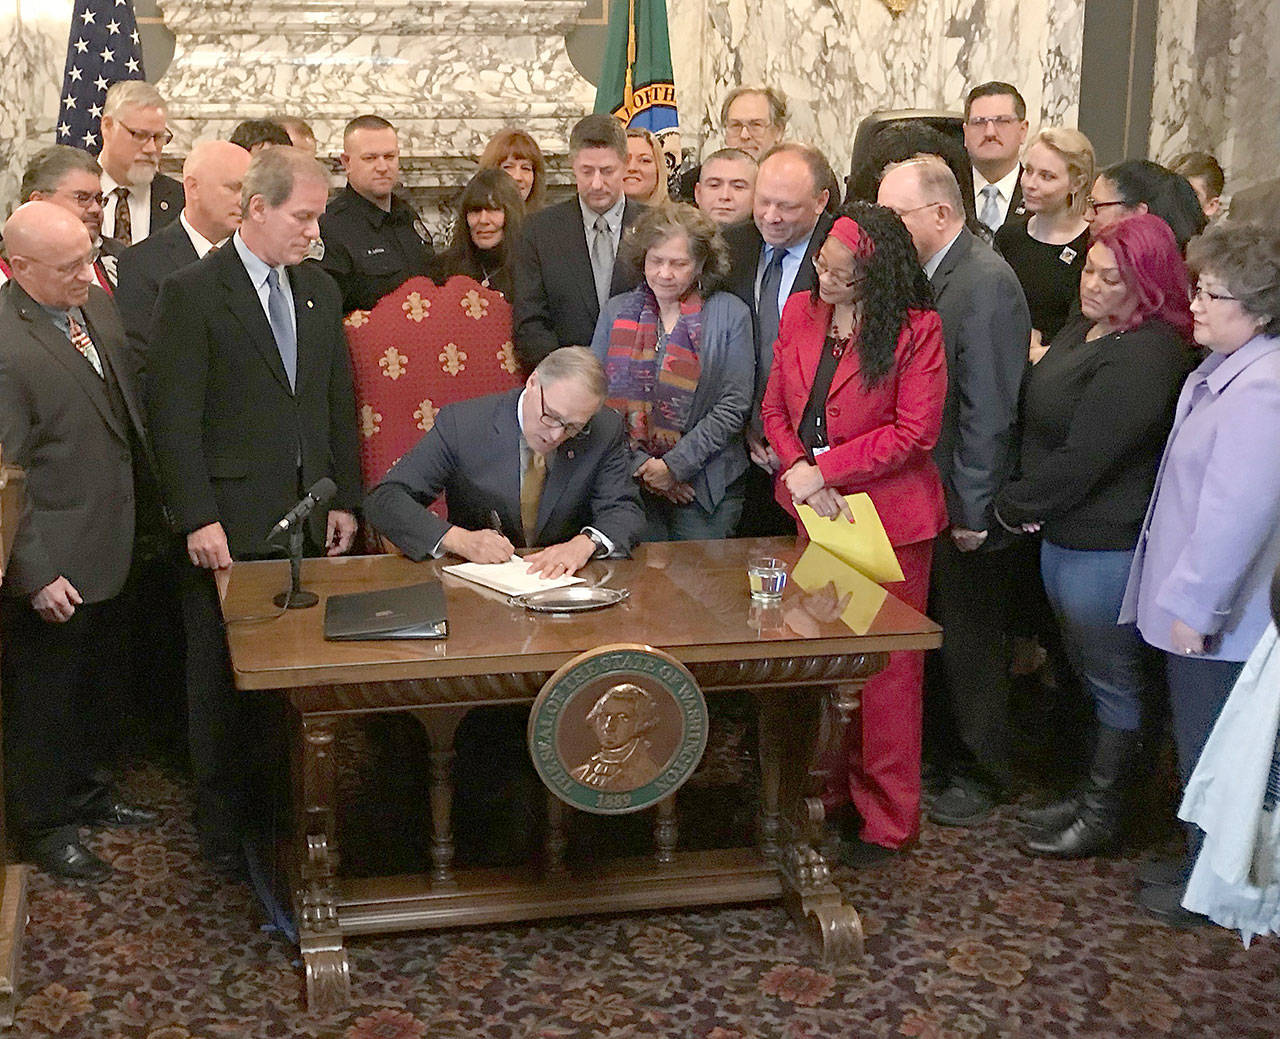 Washington Gov. Jay Inslee signs the first bill of the 2019 legislative session Monday, Feb. 4, at a ceremony in the State Reception Room in Olympia. Substitute House Bill 1064, adds training requirements for law enforcement officers to de-escalate situations and expands training in the areas of mental health and first aid to help avoid the use of deadly force. The law contains an emergency clause and takes effect immediately. “This bill which passed unanimously in both chambers doesn’t fix everything,” Inslee said. “Far from it. But it is a start and it is a message that when people listen to each other and open their hearts to each other, justice can move forward.” Photo by Sean Harding | Washington Newspaper Publishers Association